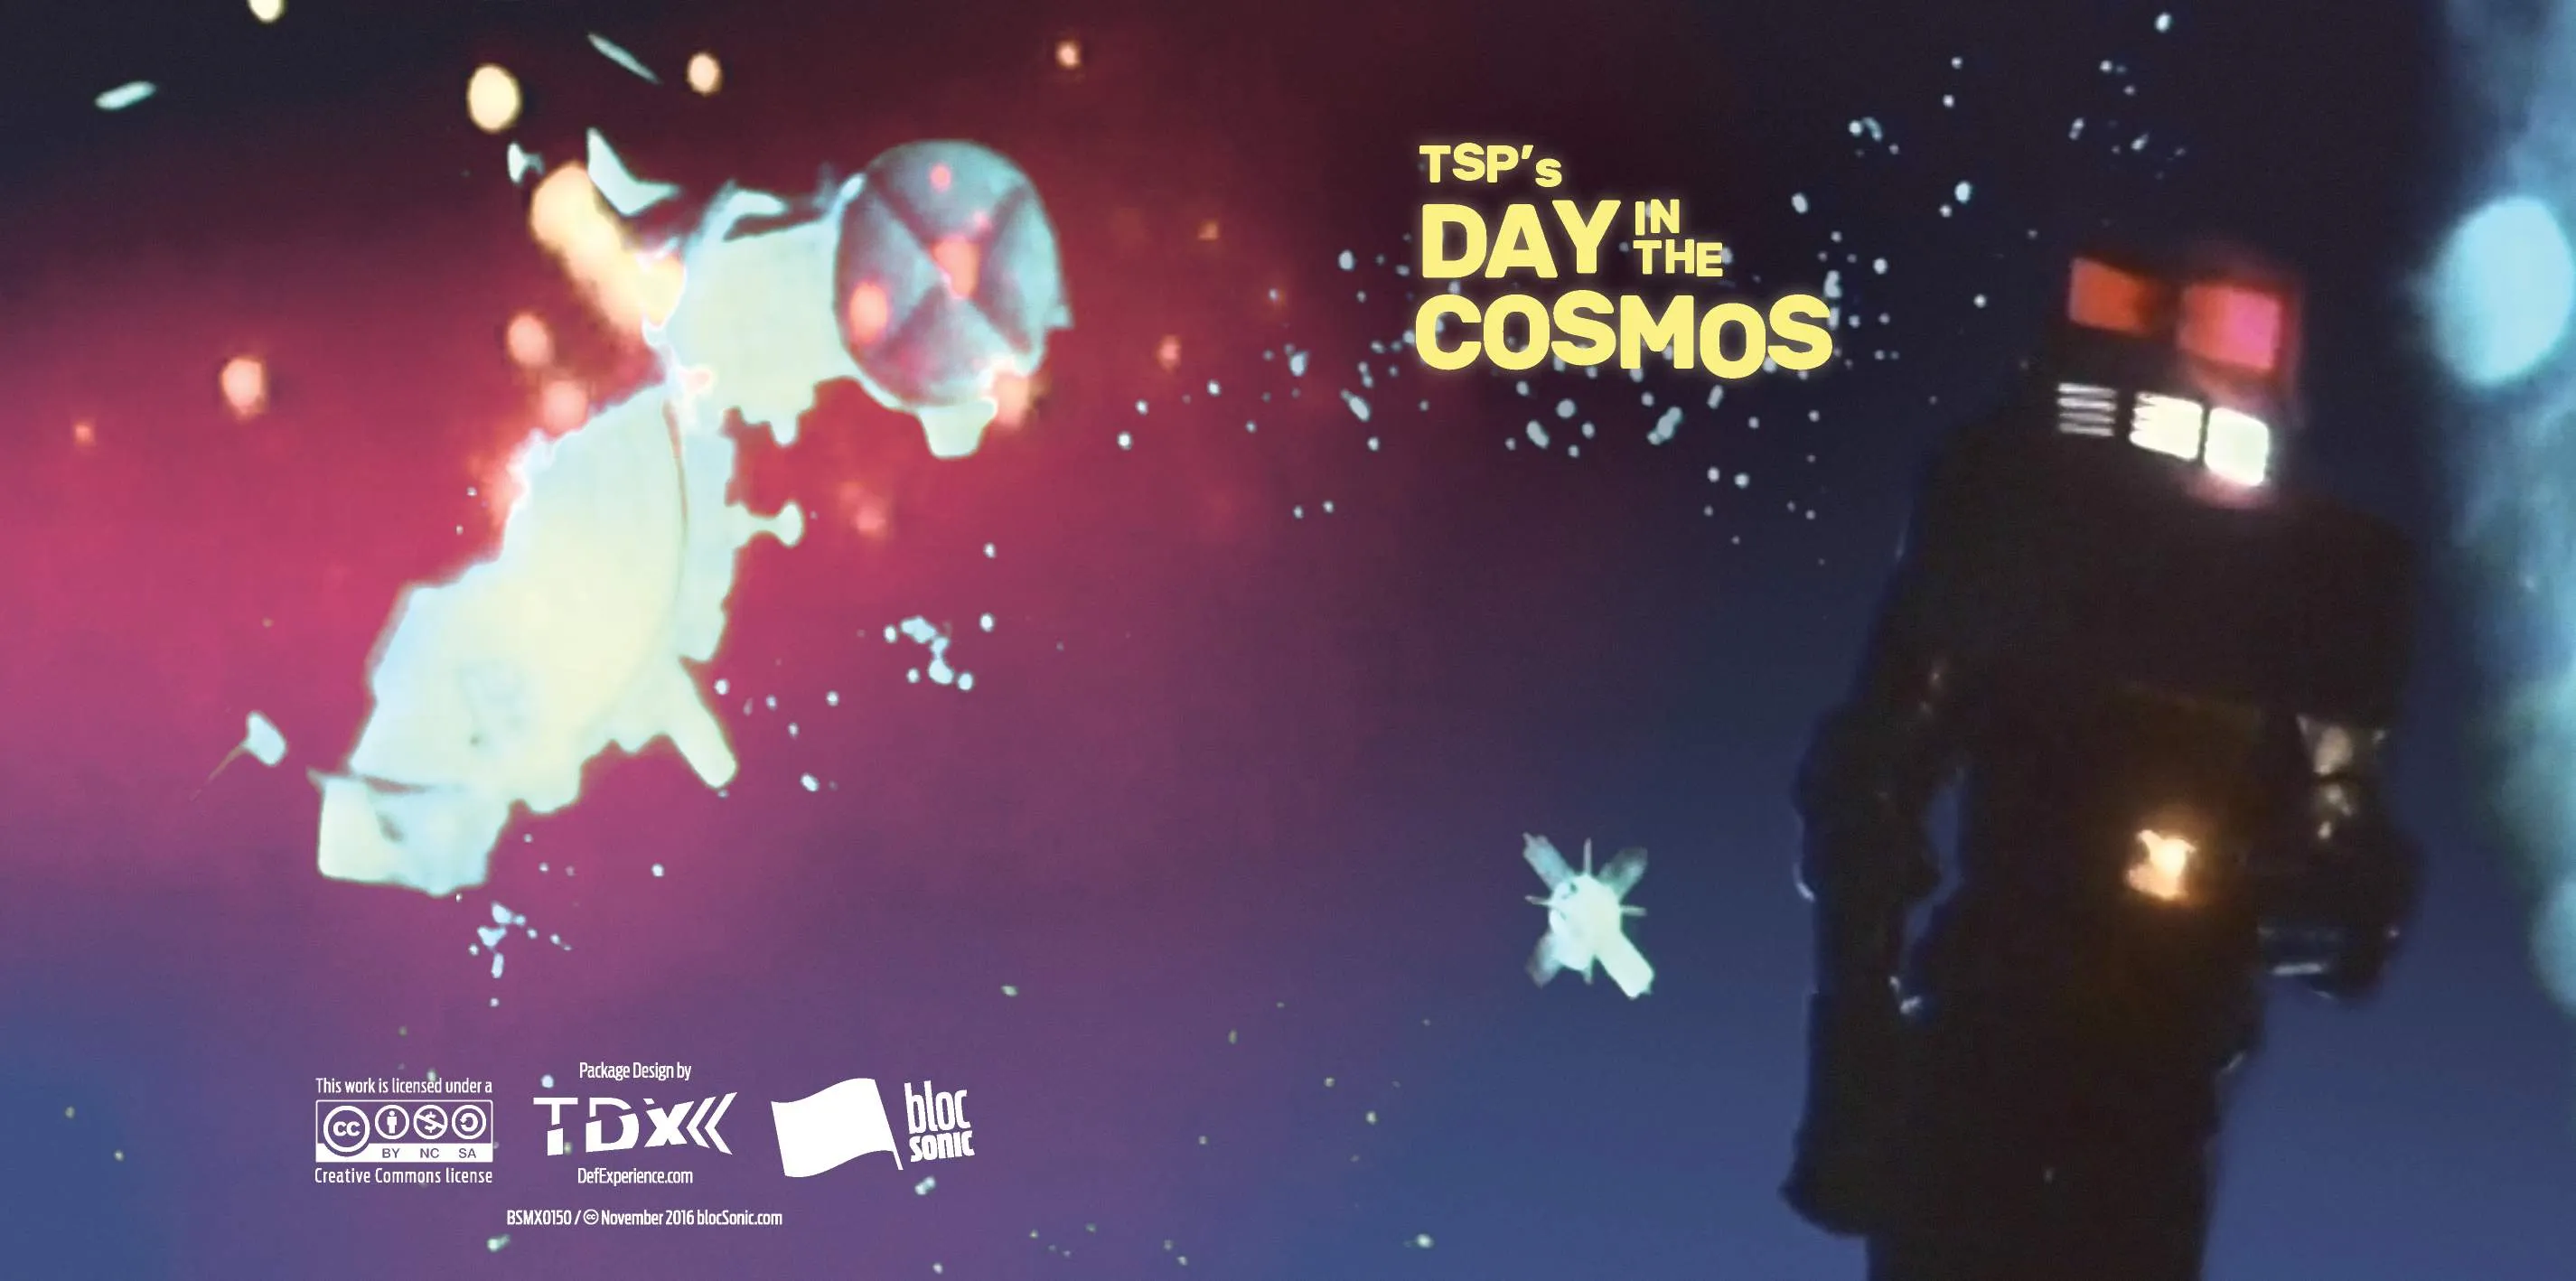 Album insert for “TSP’s Day In The Cosmos” by Tha Silent Partner